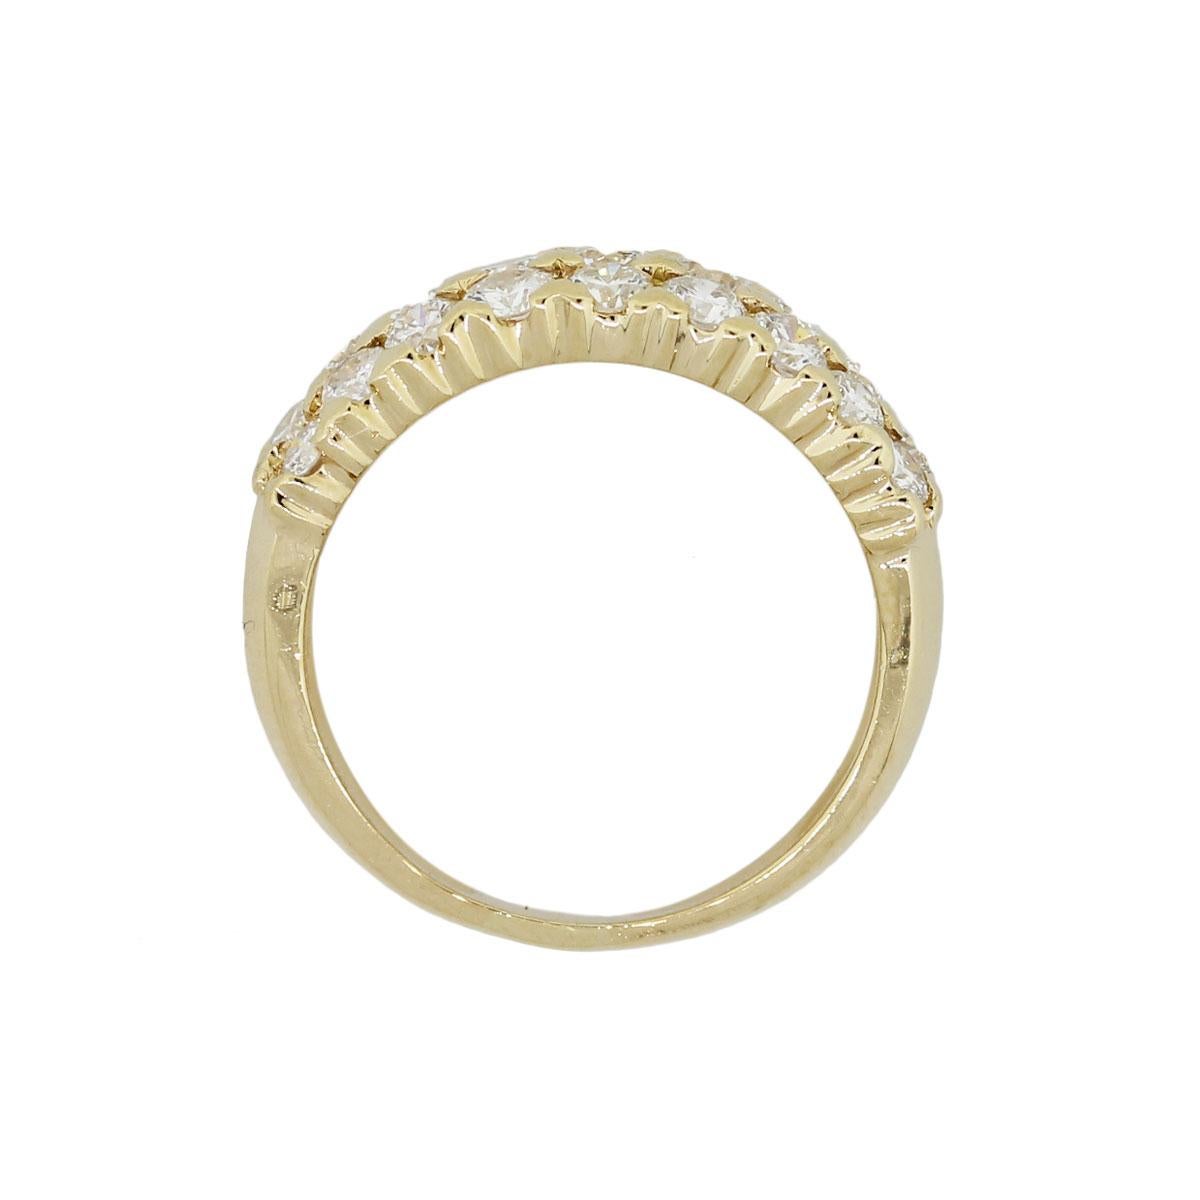 Material: 18k yellow gold
Diamond Details: Approximately 1.50ctw of round brilliant diamonds. Diamonds are G/H in color and VS in clarity
Ring Size: 6 (can be sized)
Ring Measurements: 0.81″ x 0.35″ x 0.81″
Total Weight: 5g (3.2dwt)
Additional